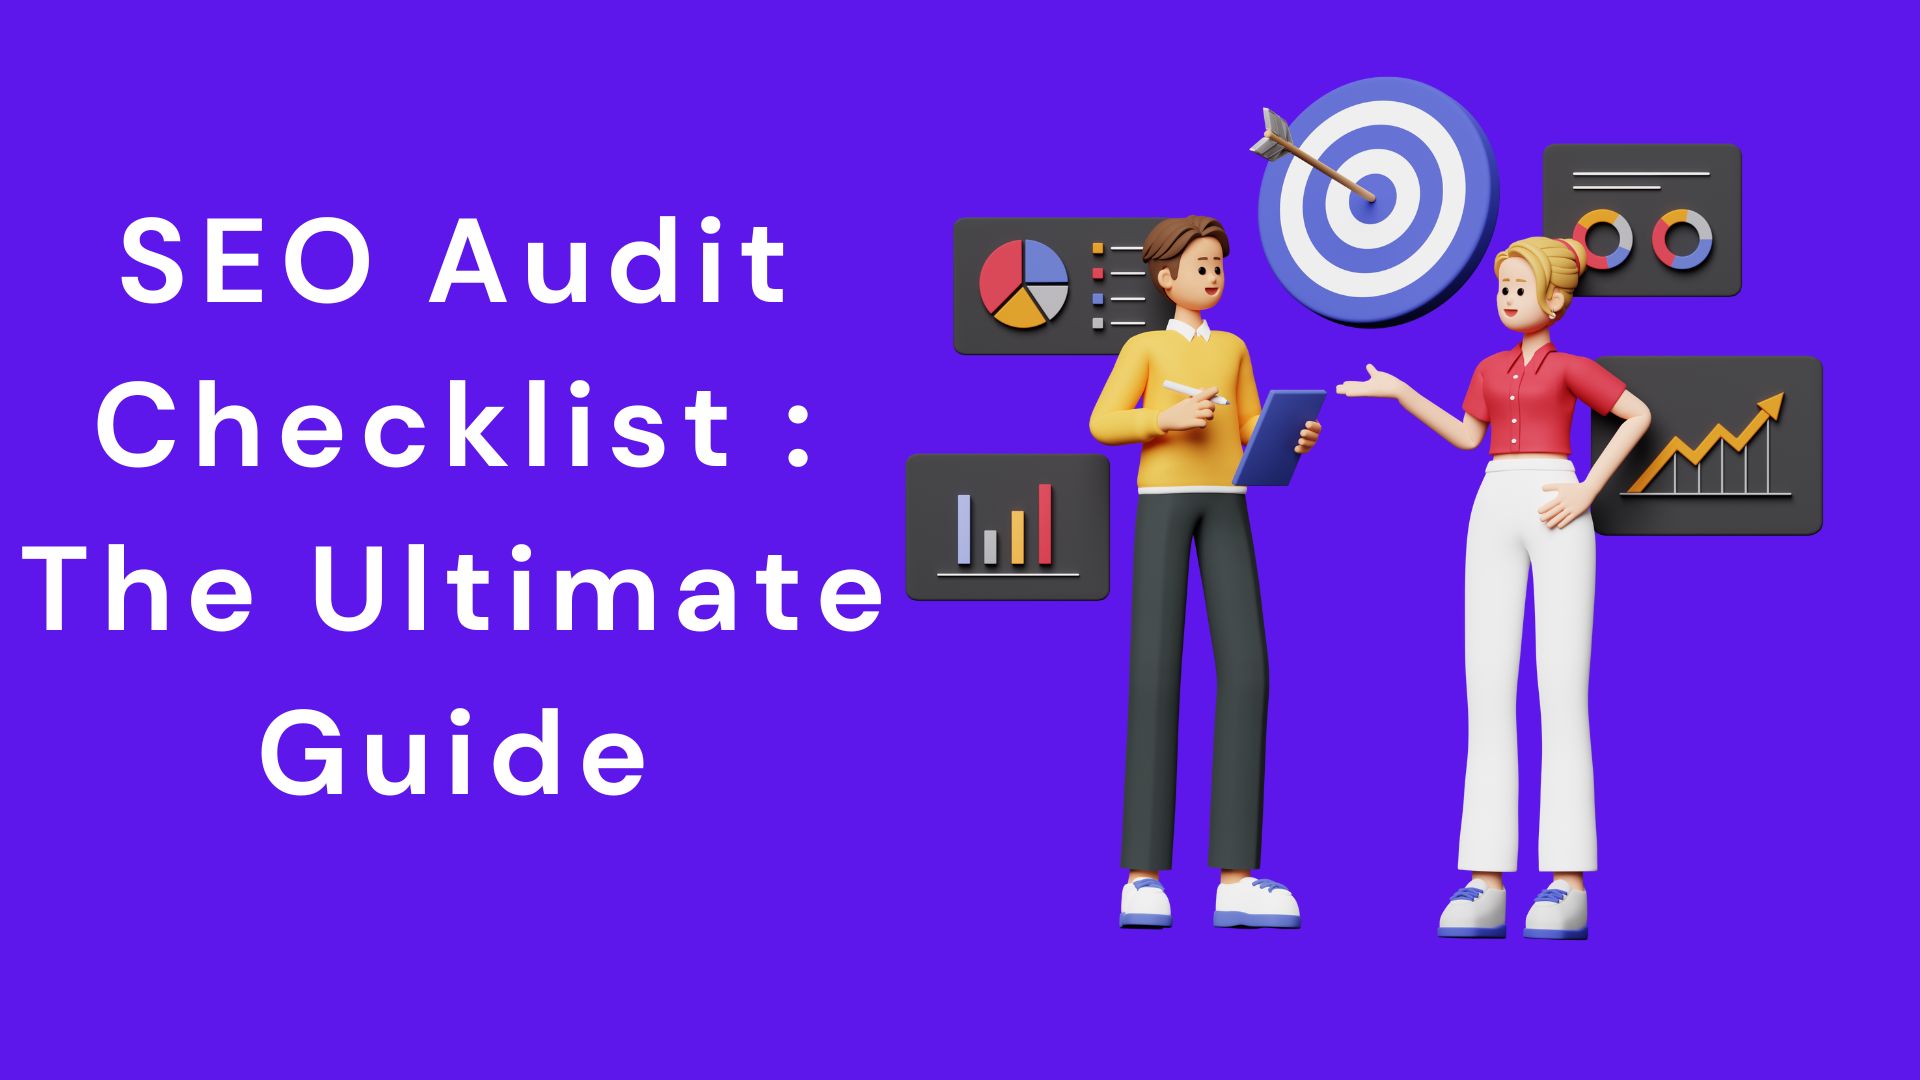 SEO Audit Checklist The Ultimate Guide